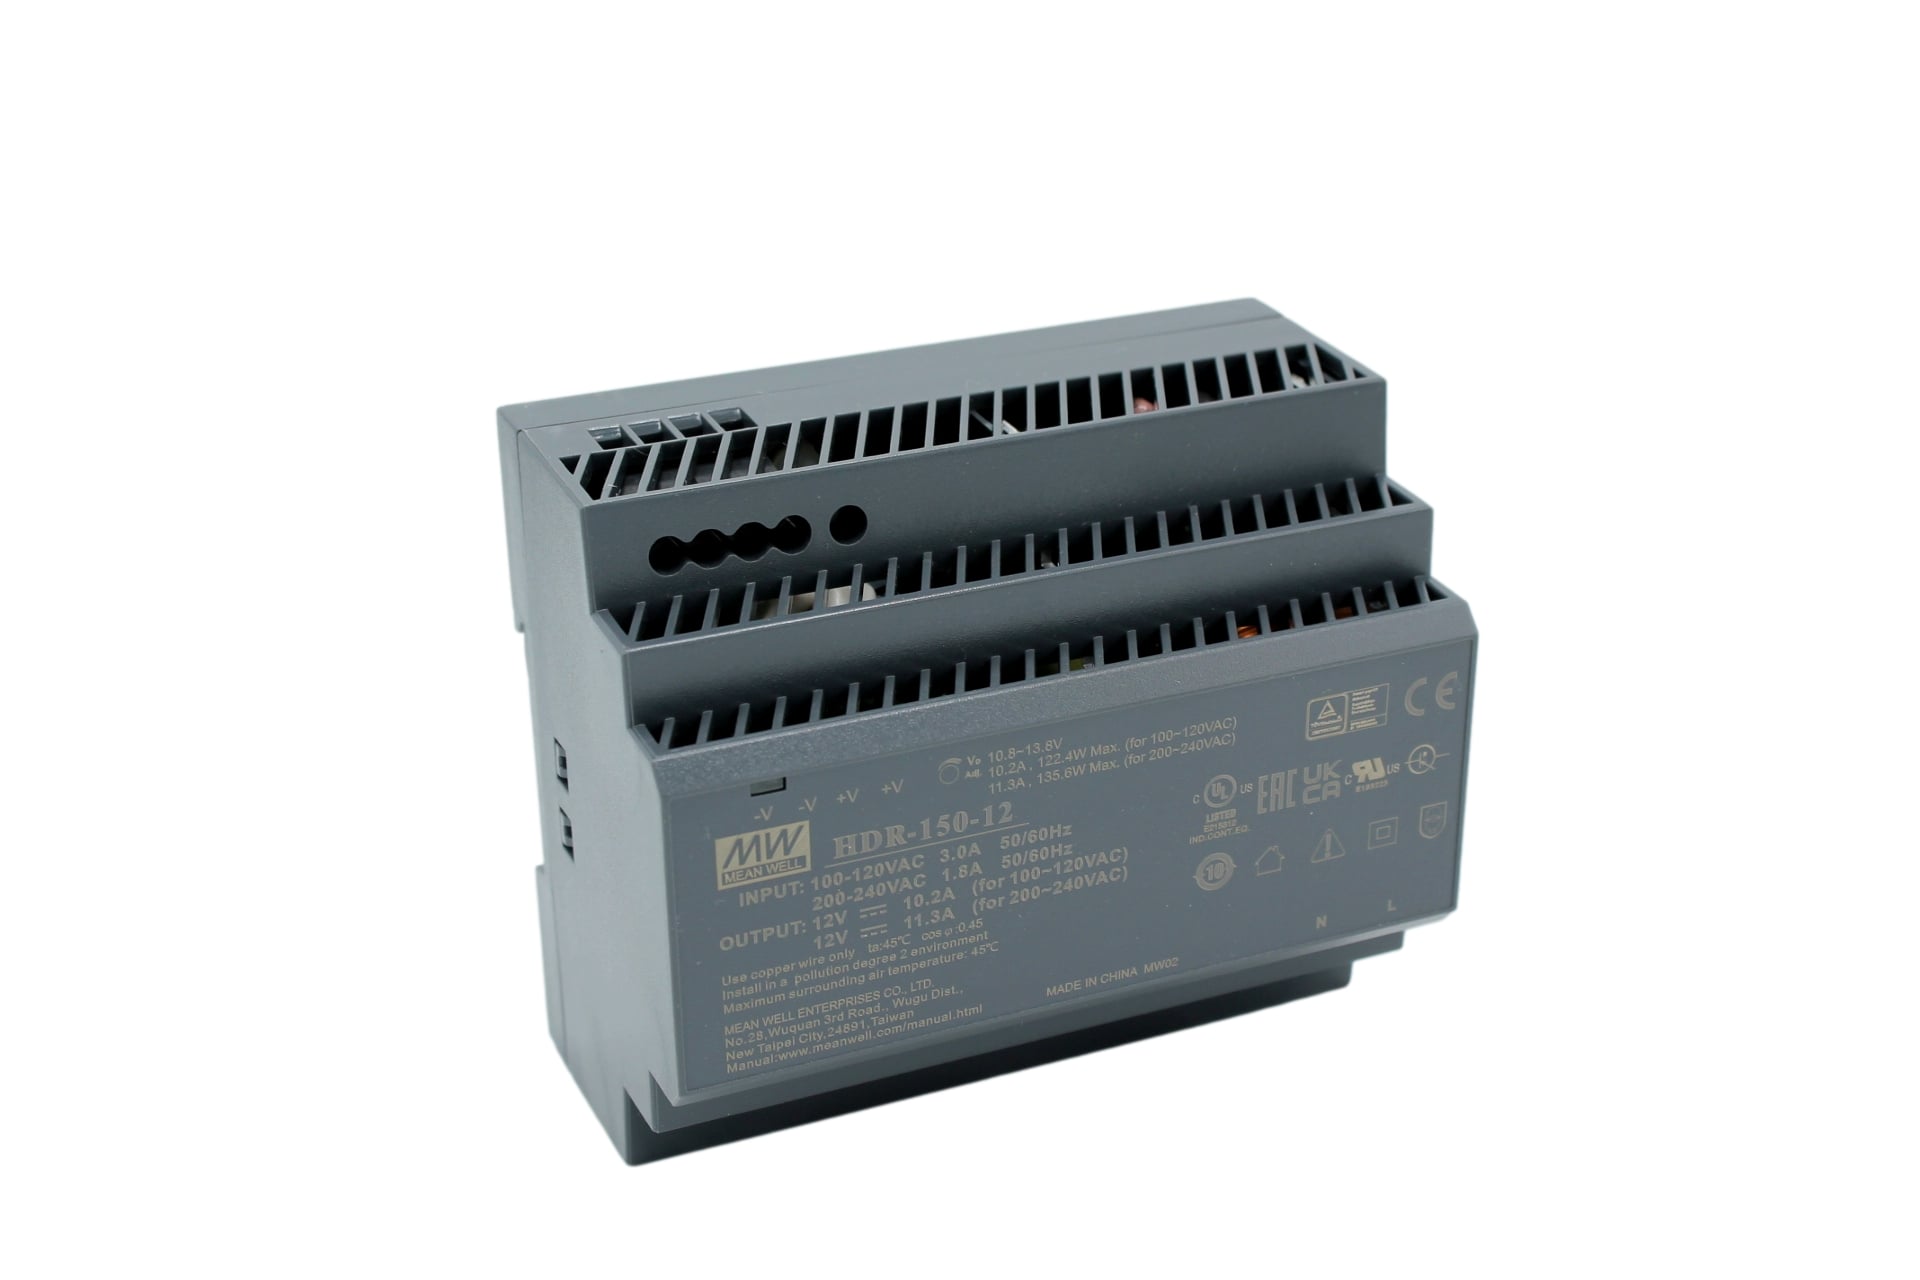 HDR-150-12 DIN rail power supply, 135.6W, 12V, 11.3A, MEAN WELL